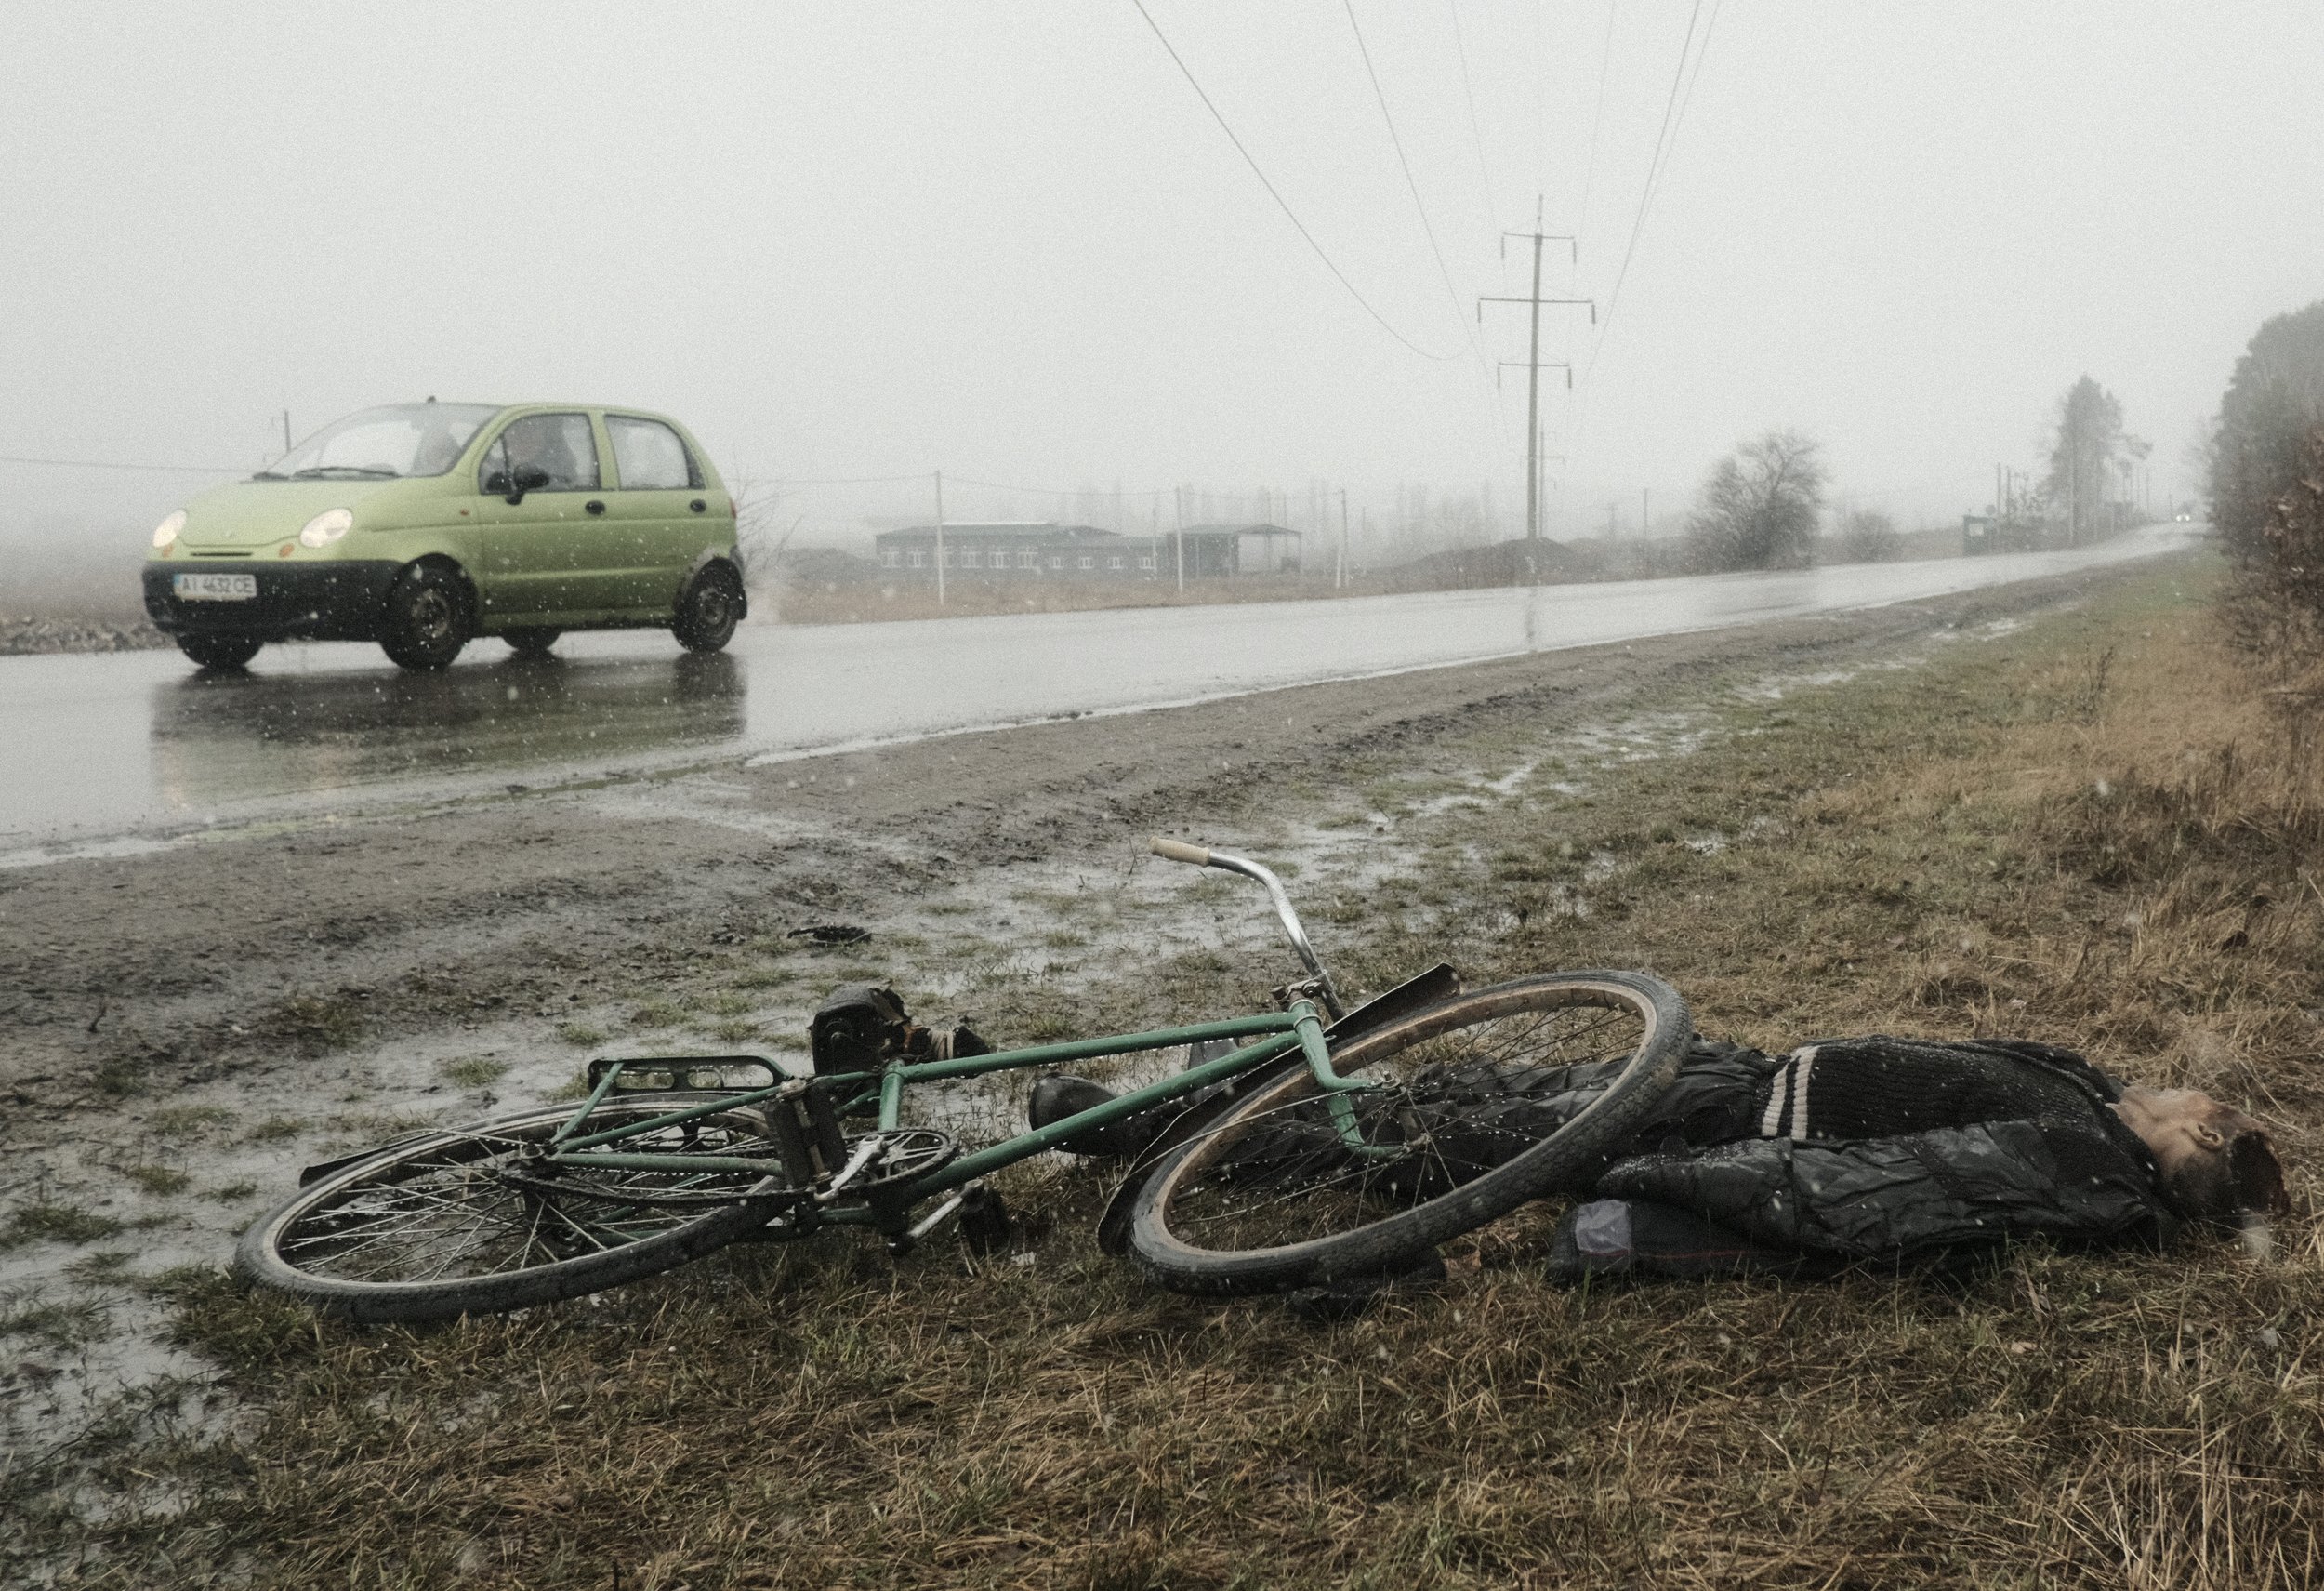  The body of a Ukrainian civilian lies next to his bicycle where he fell on the side of a road near Bucha, Ukraine on April 3, 2022. After Ukrainian forces liberated the villages and towns surrounding Kyiv, mass graves and the bodies of civilians wer